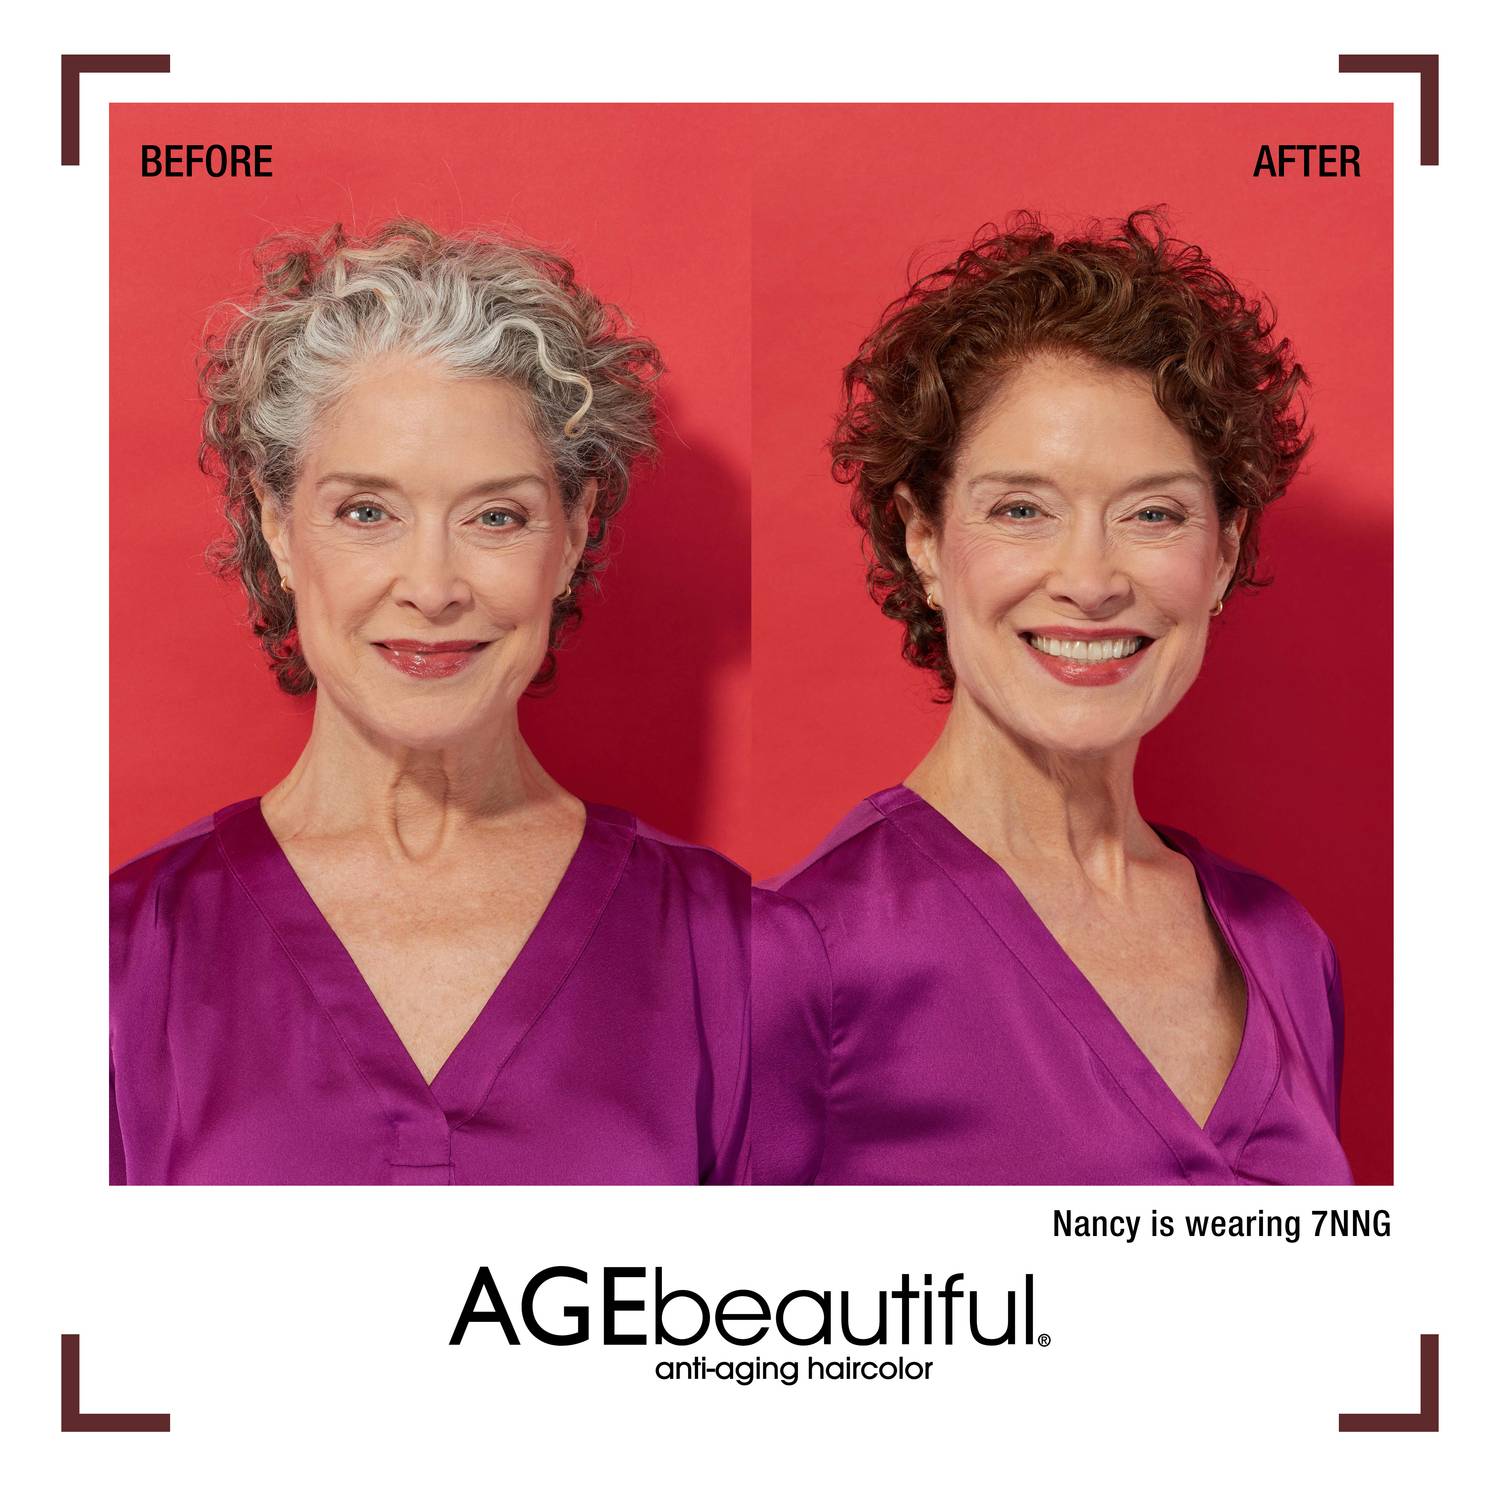 AGEbeautiful Hair Color before after 7NNG Dark Intense Golden Brown